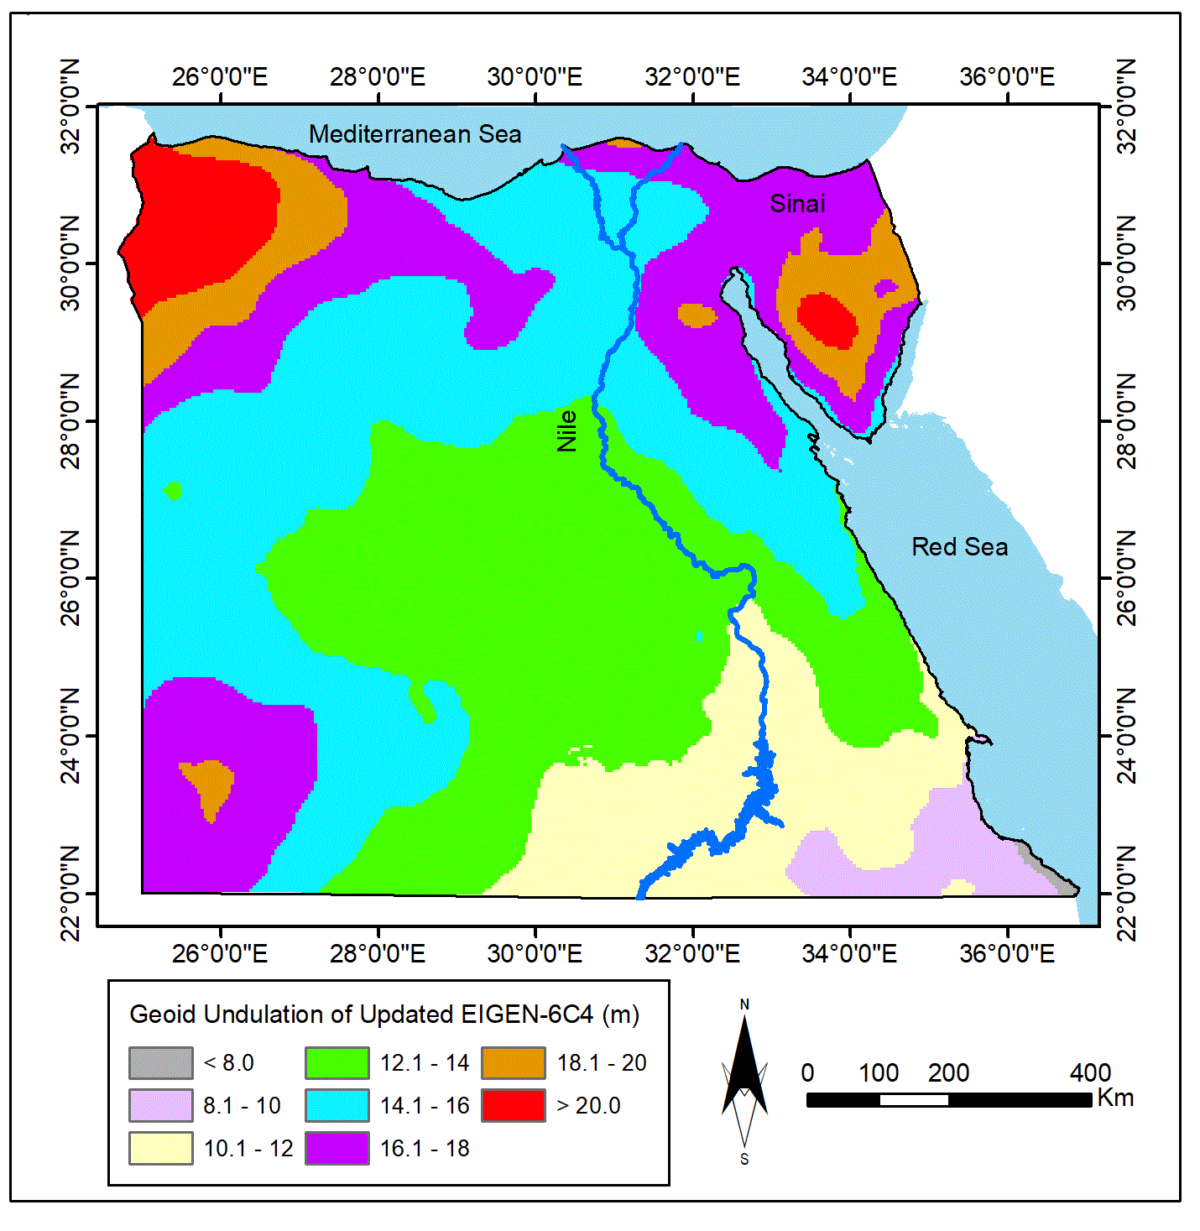 Featured figure showing GGM-Based Geoid Undulations over Egypt (part of Fig. 4.1 in the article)